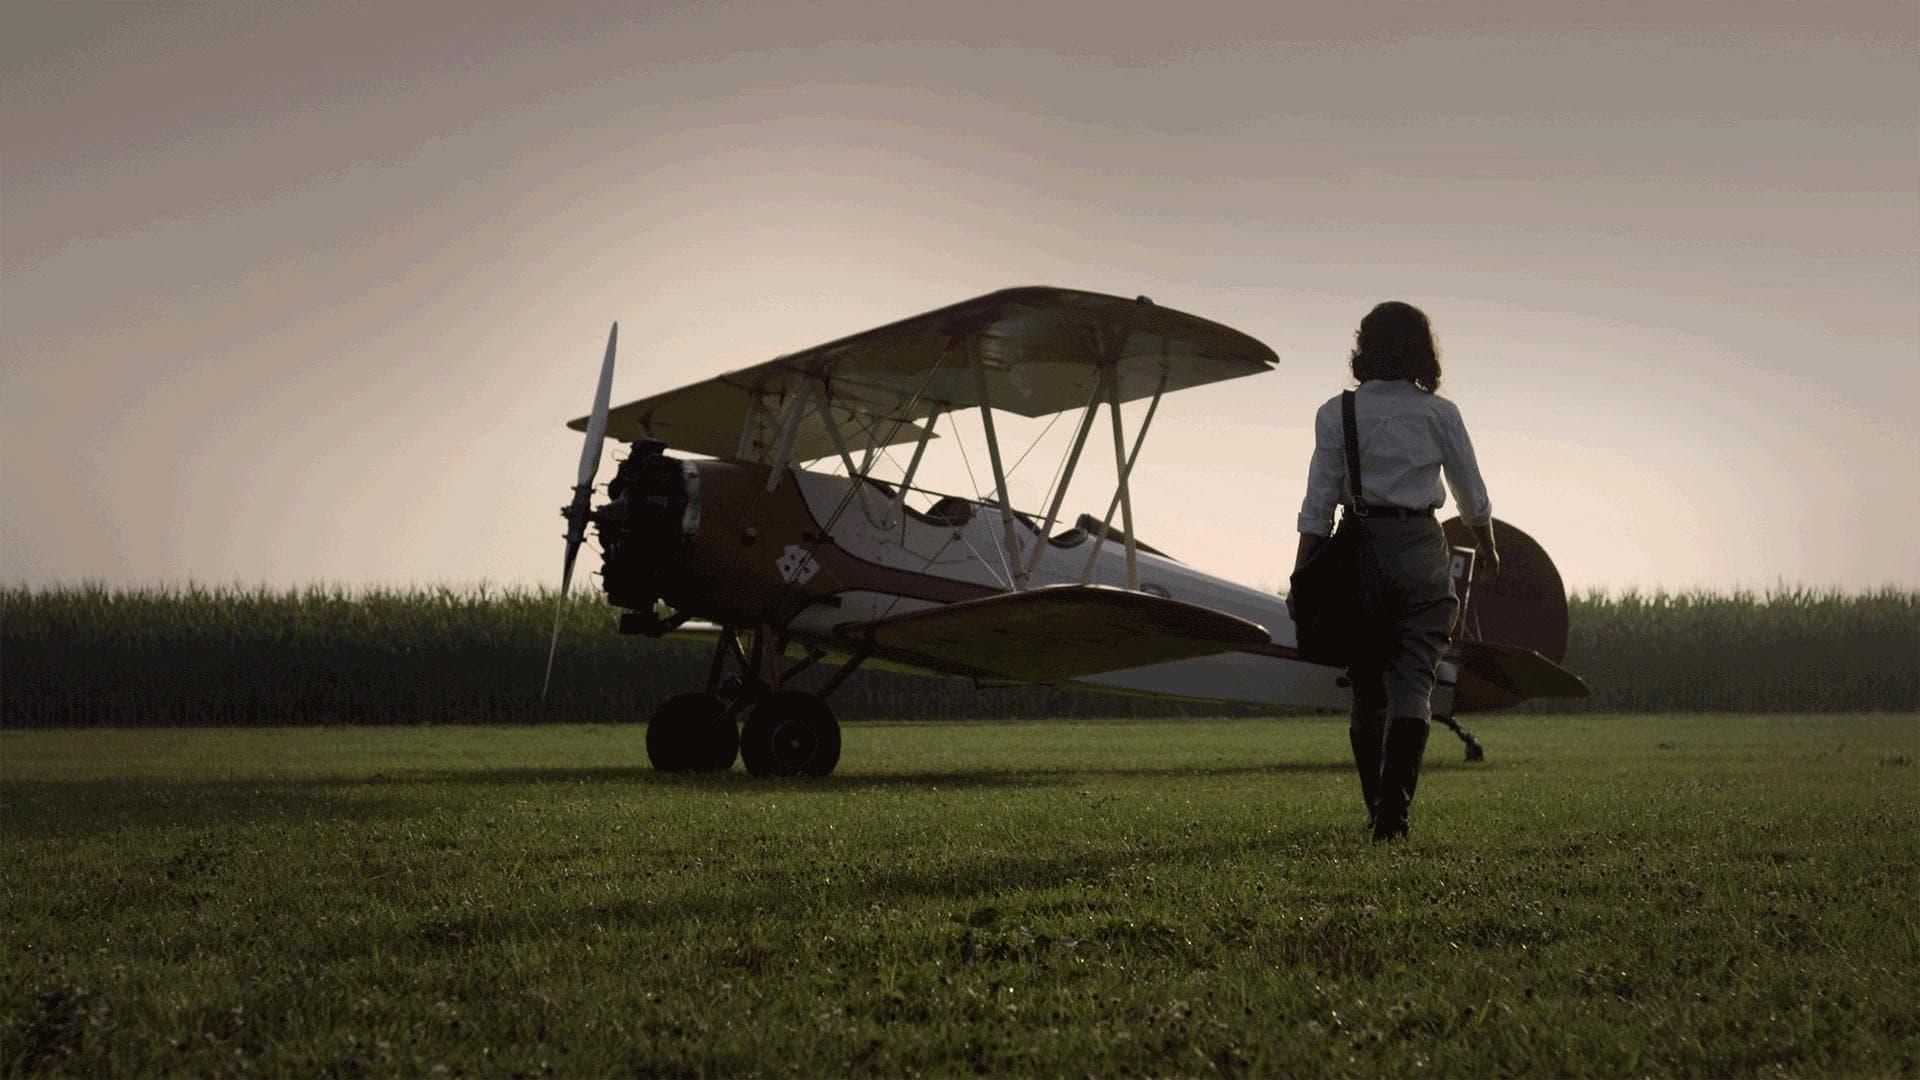 Beyond the Powder: The Legacy of the First Women's Cross-Country Air Race backdrop